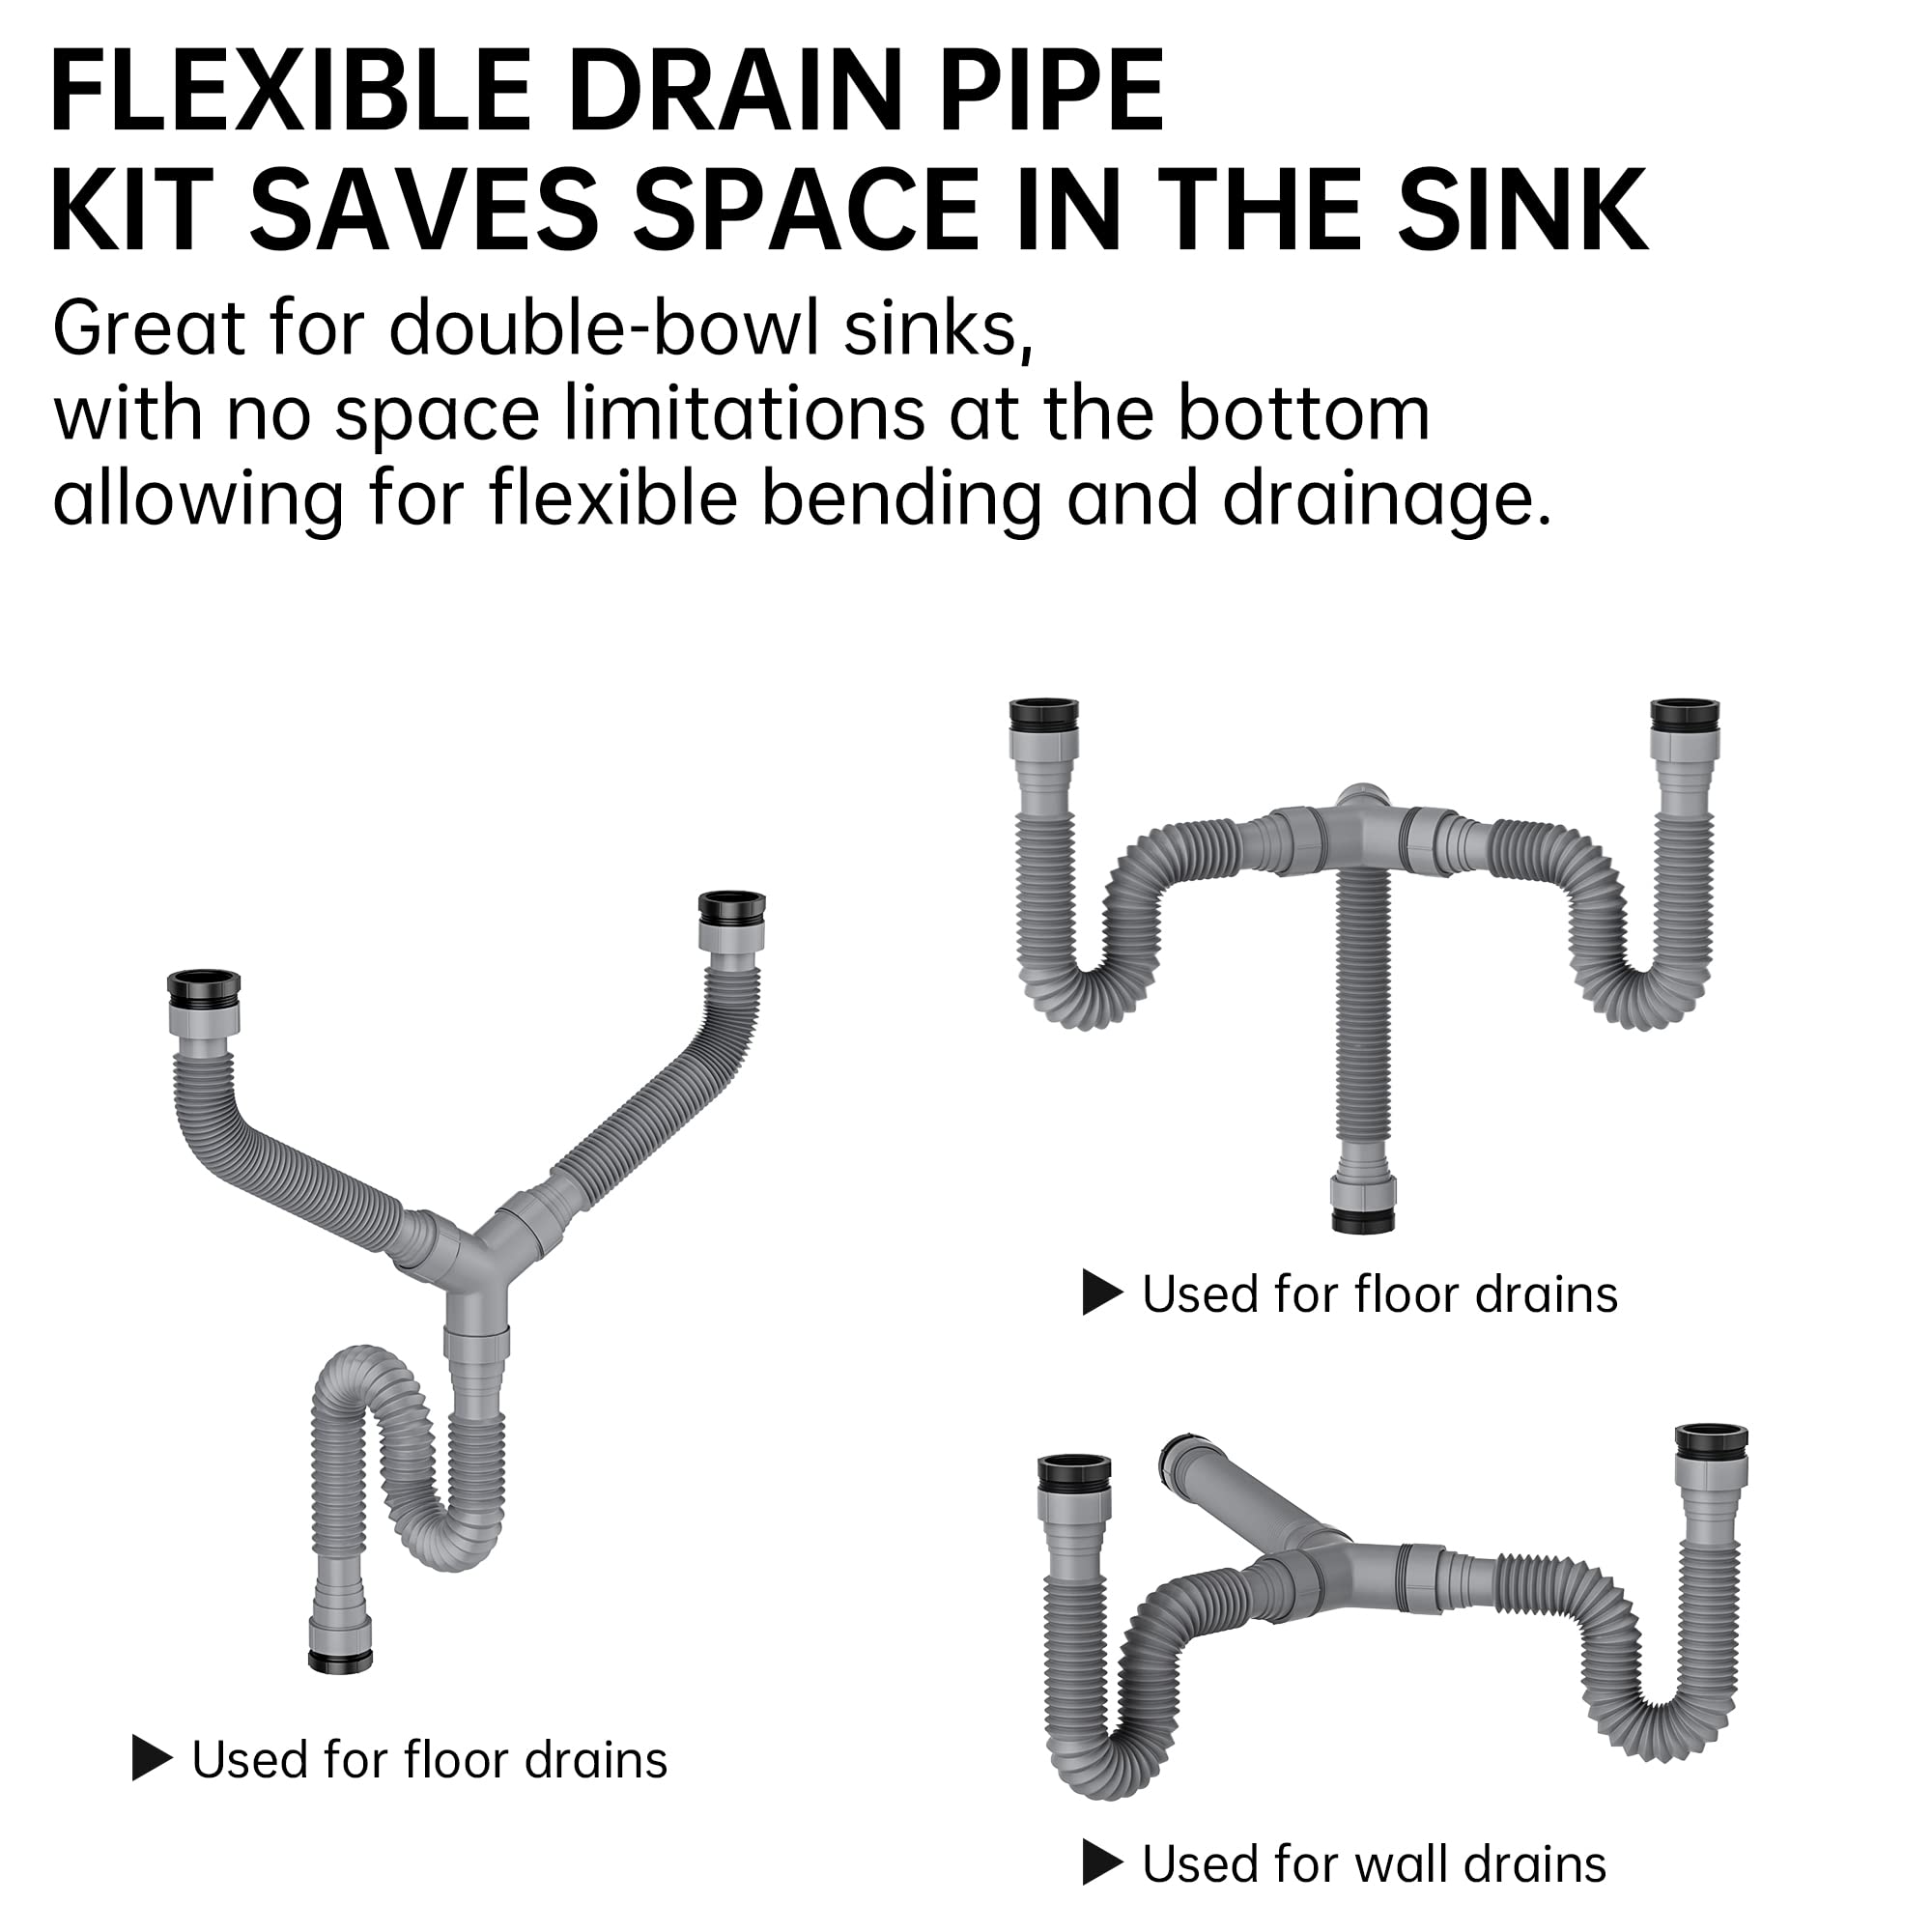 SAINT NIEVE Flexible Expandable P-Trap Kit for Double Kitchen Sink Drain - Fits 1 1/2" or 1 1/4" Pipes-Complete with Sealing Ring, Tape, and Tubing - Perfect for Kitchen, Bathroom, and Restroom Use